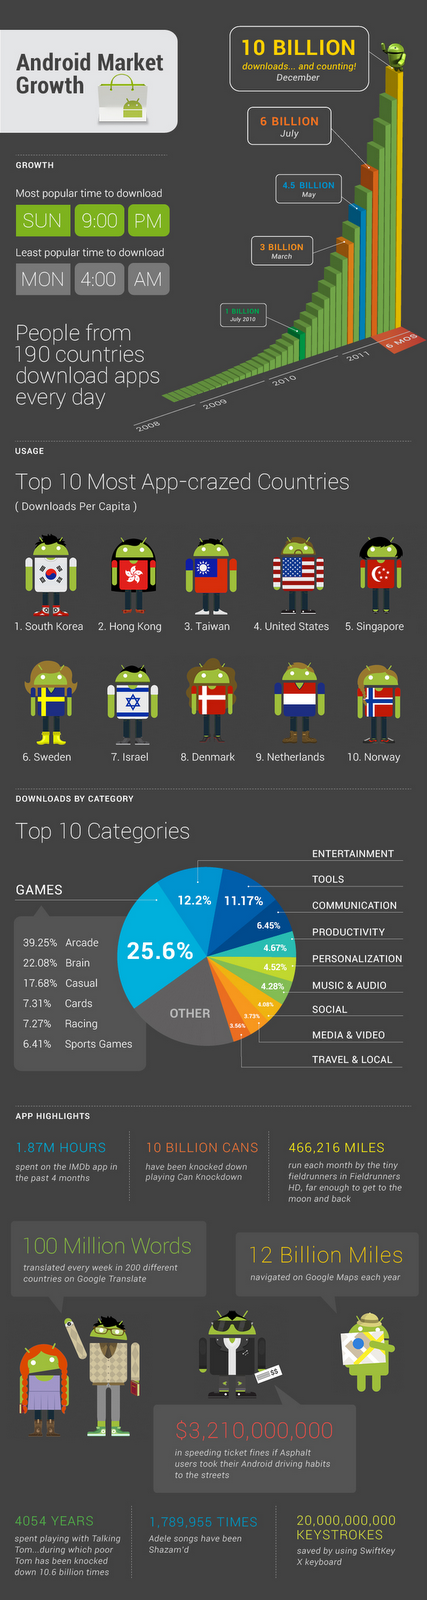 Google details the 10 billion downloads Android Market growth in an infographic